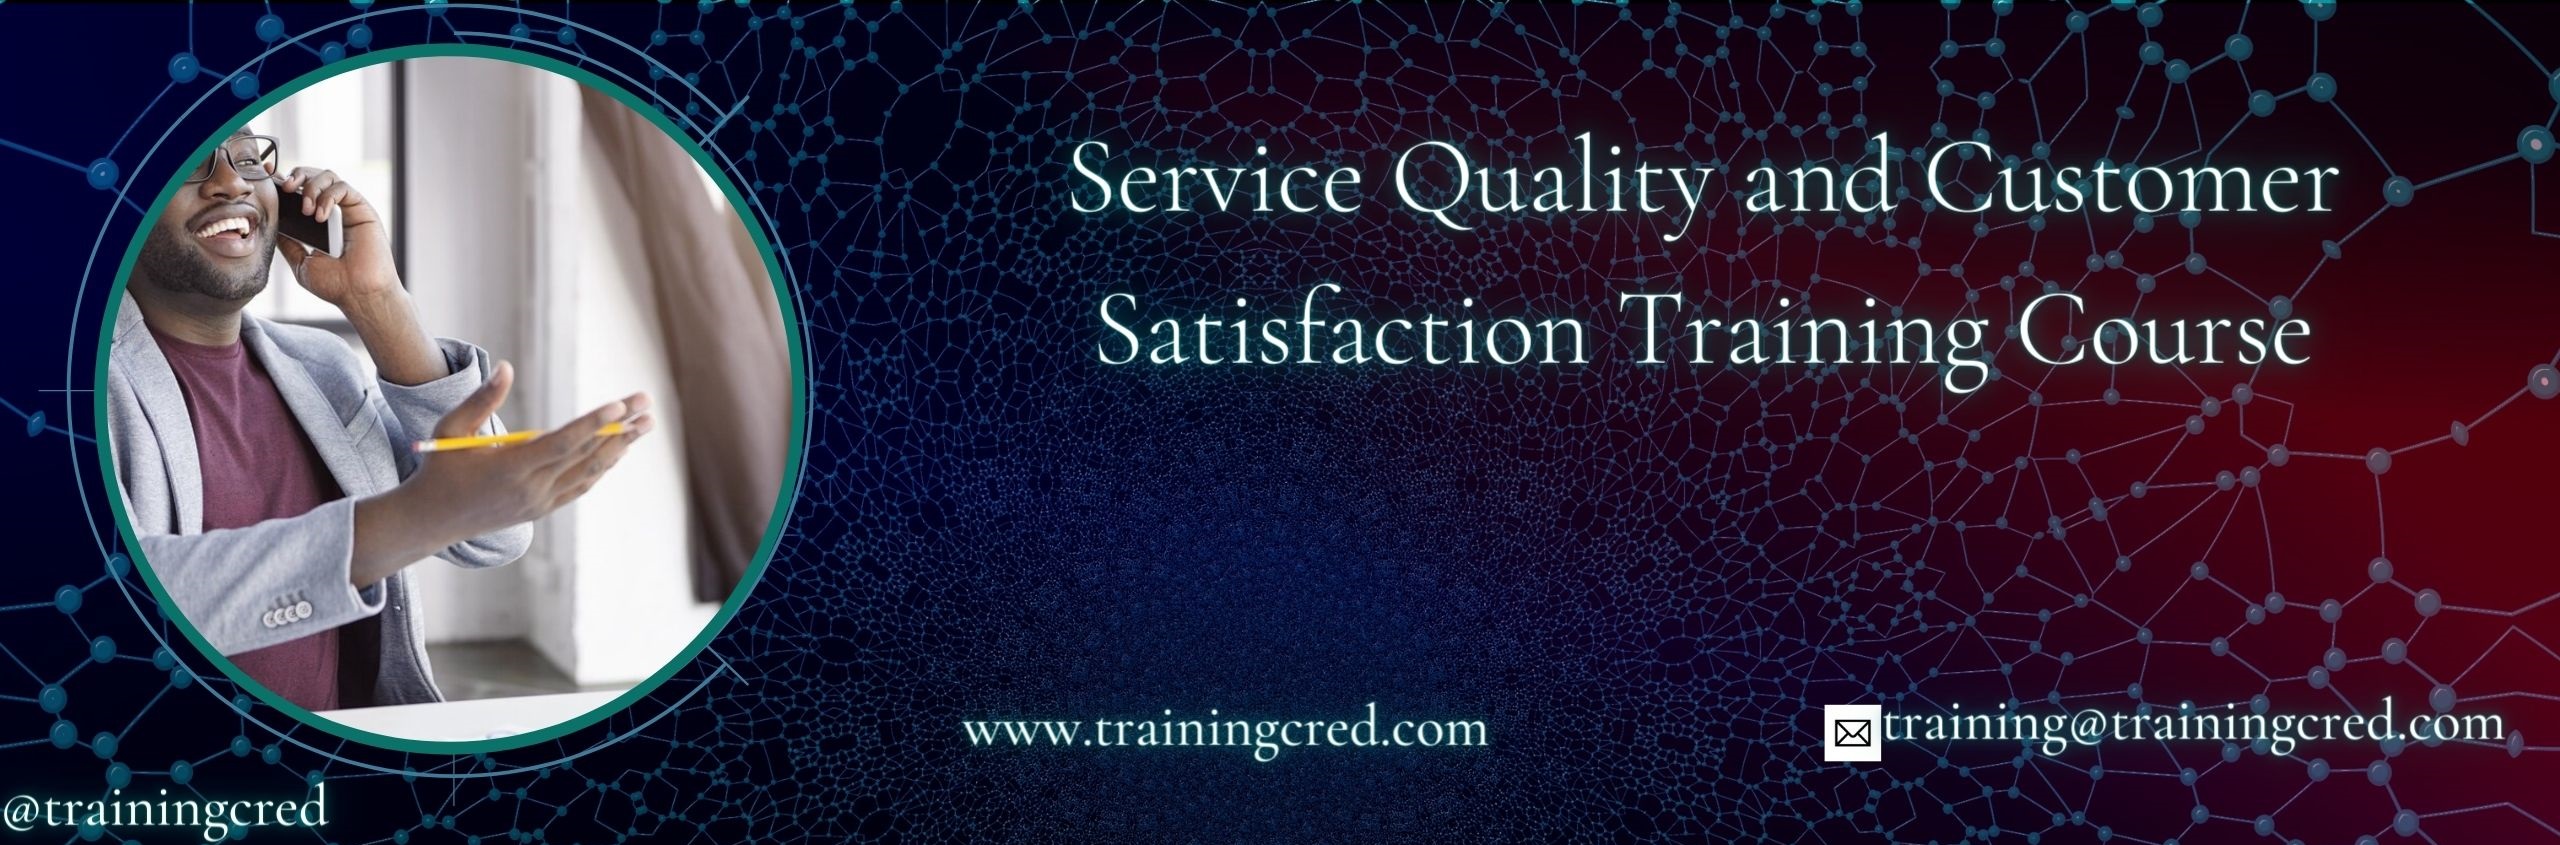 Service Quality and Customer Satisfaction Training